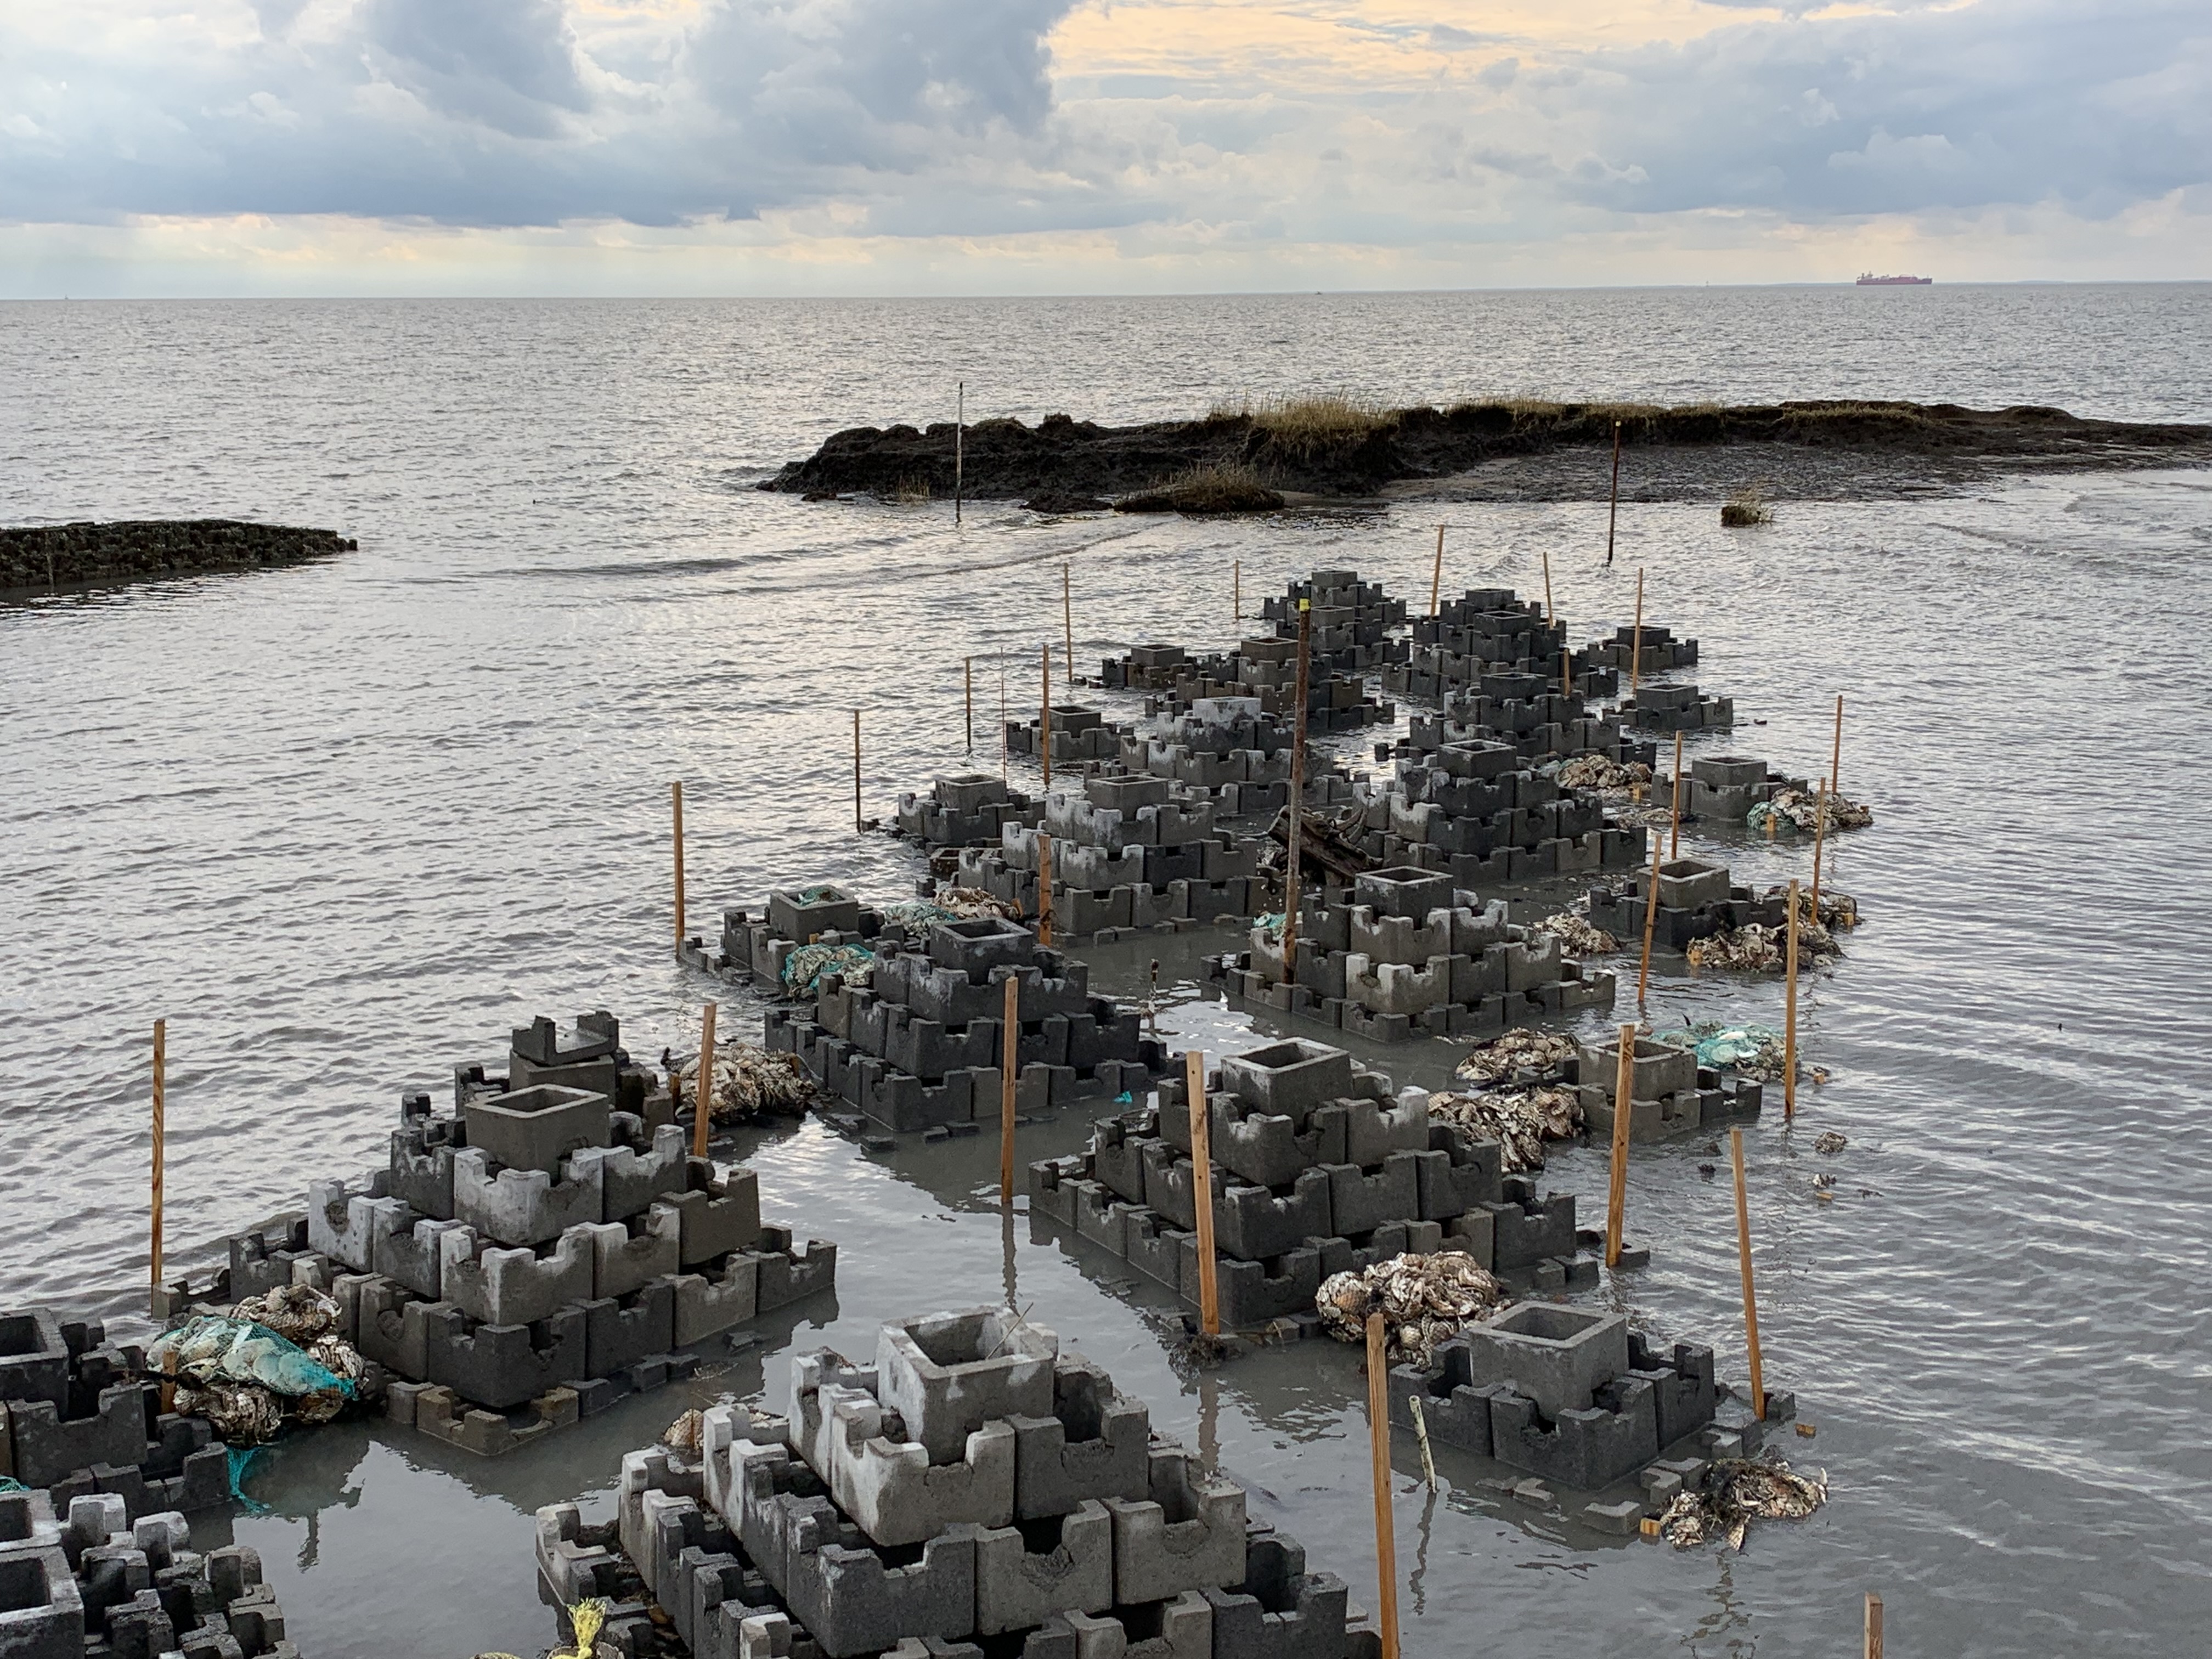 Several pyramid-type structures made of small concrete blocks sit in the water with an island-like peninsula behind them. 